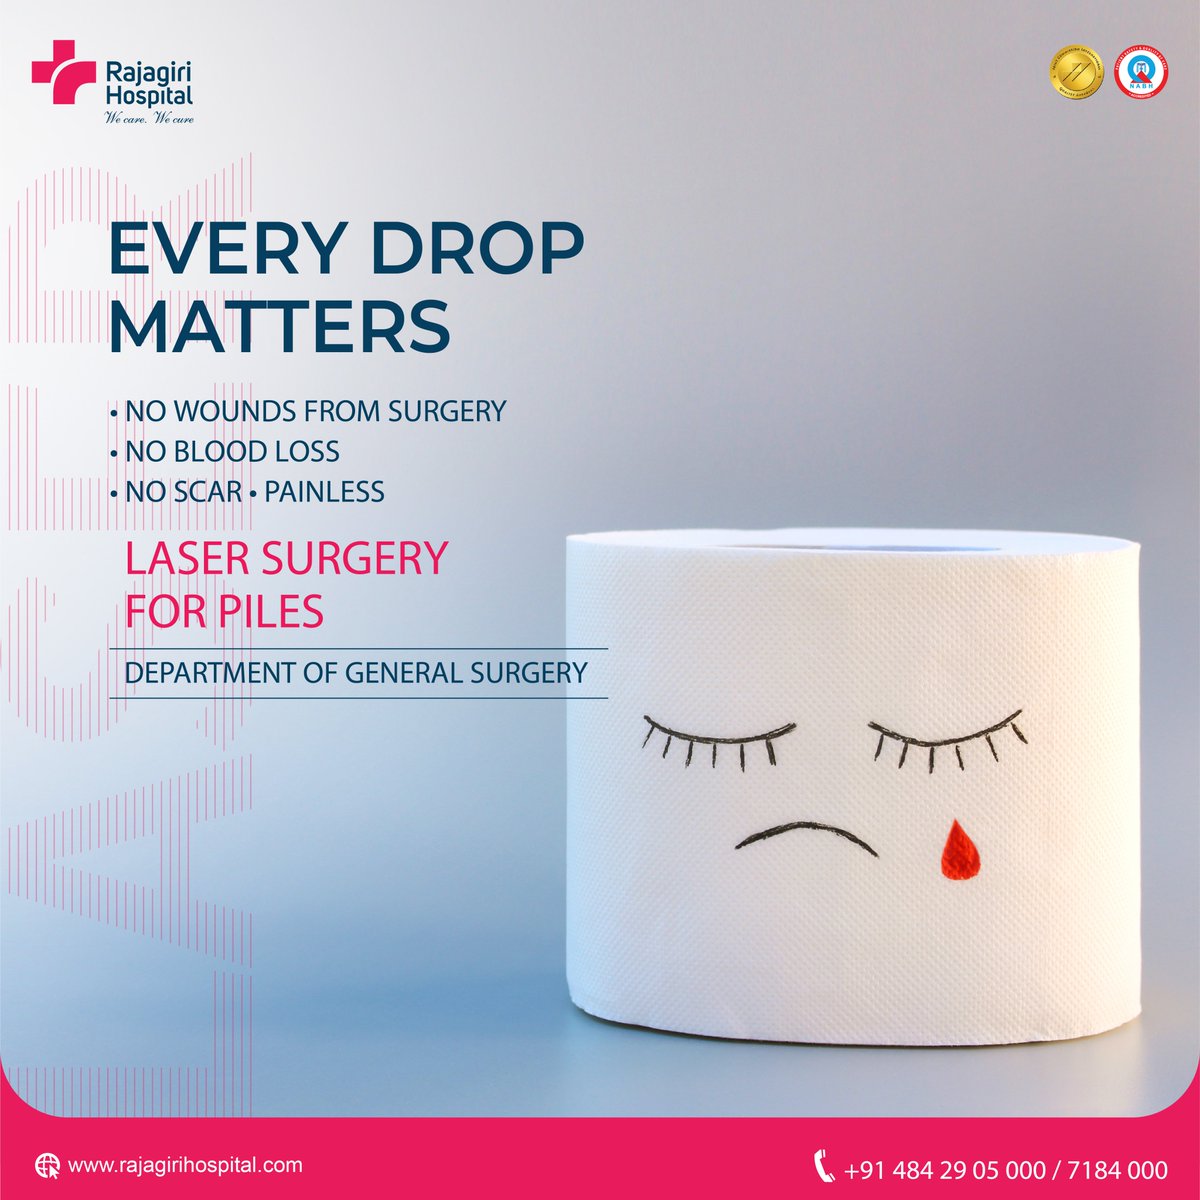 Every Drop Matters. Department of General Surgery at Rajagiri hospital provides Laser Surgery for Piles. 
For appointments call 0484 2905111 / 7184111.
#RajagiriHospital #lasertreatment #laser #PilesTreatment #fistulatreatment #piles #fistula #lesspain #health